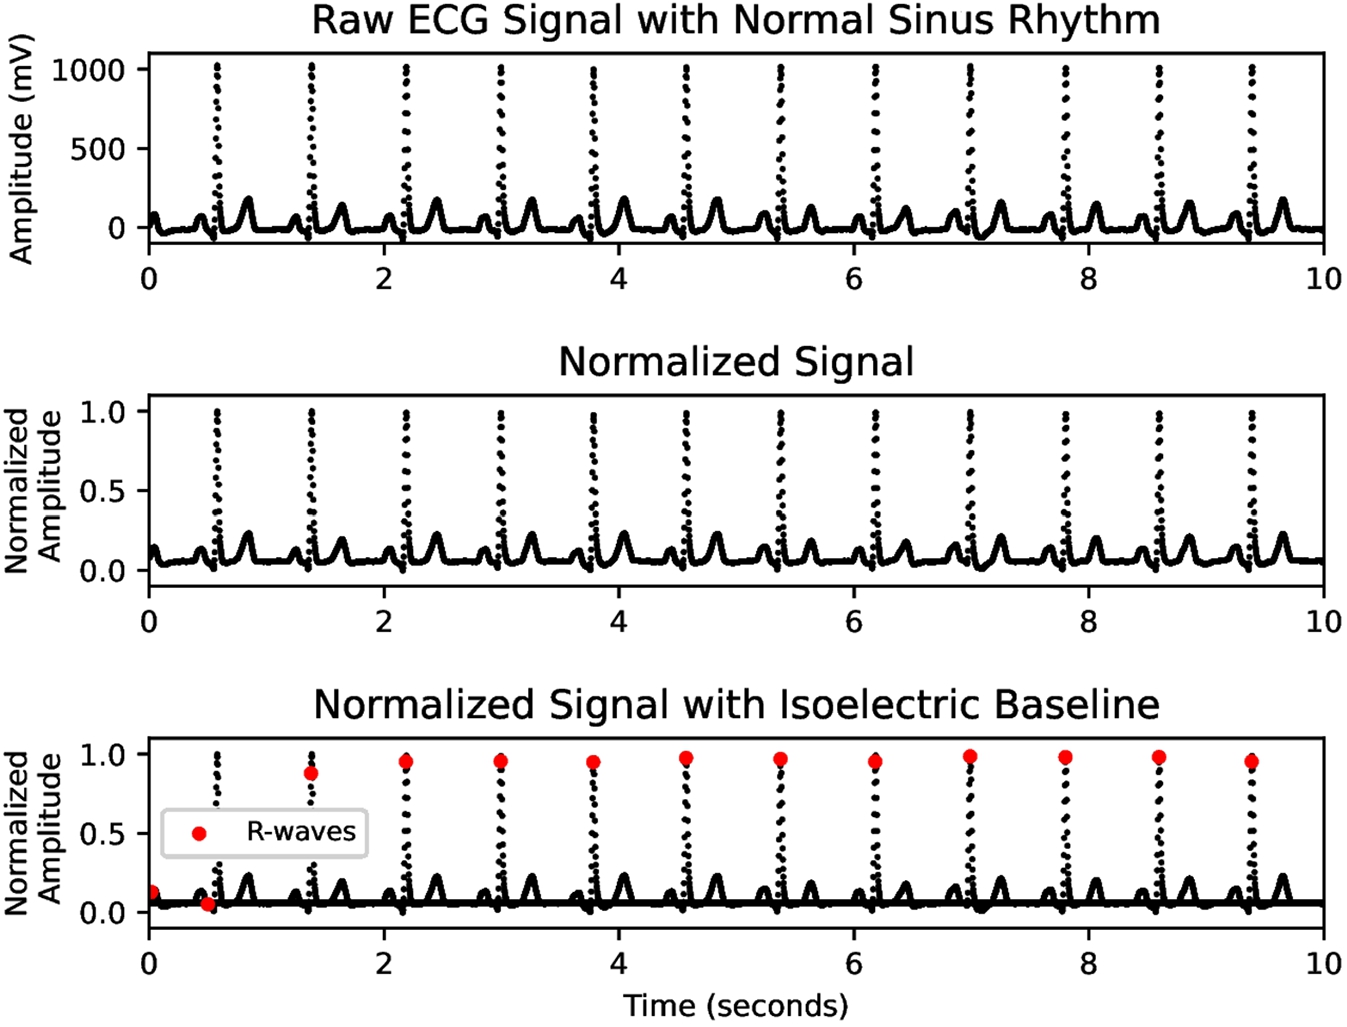 Depiction of preprocessing transformations applied to a normal sinus rhythm ECG signal. A) raw ECG signal with normal sinus rhythm. B) normalized ECG signal with maximum amplitude 1 and minimum amplitude 0. C) normalized ECG signal with isoelectric baseline included and R-waves identified.